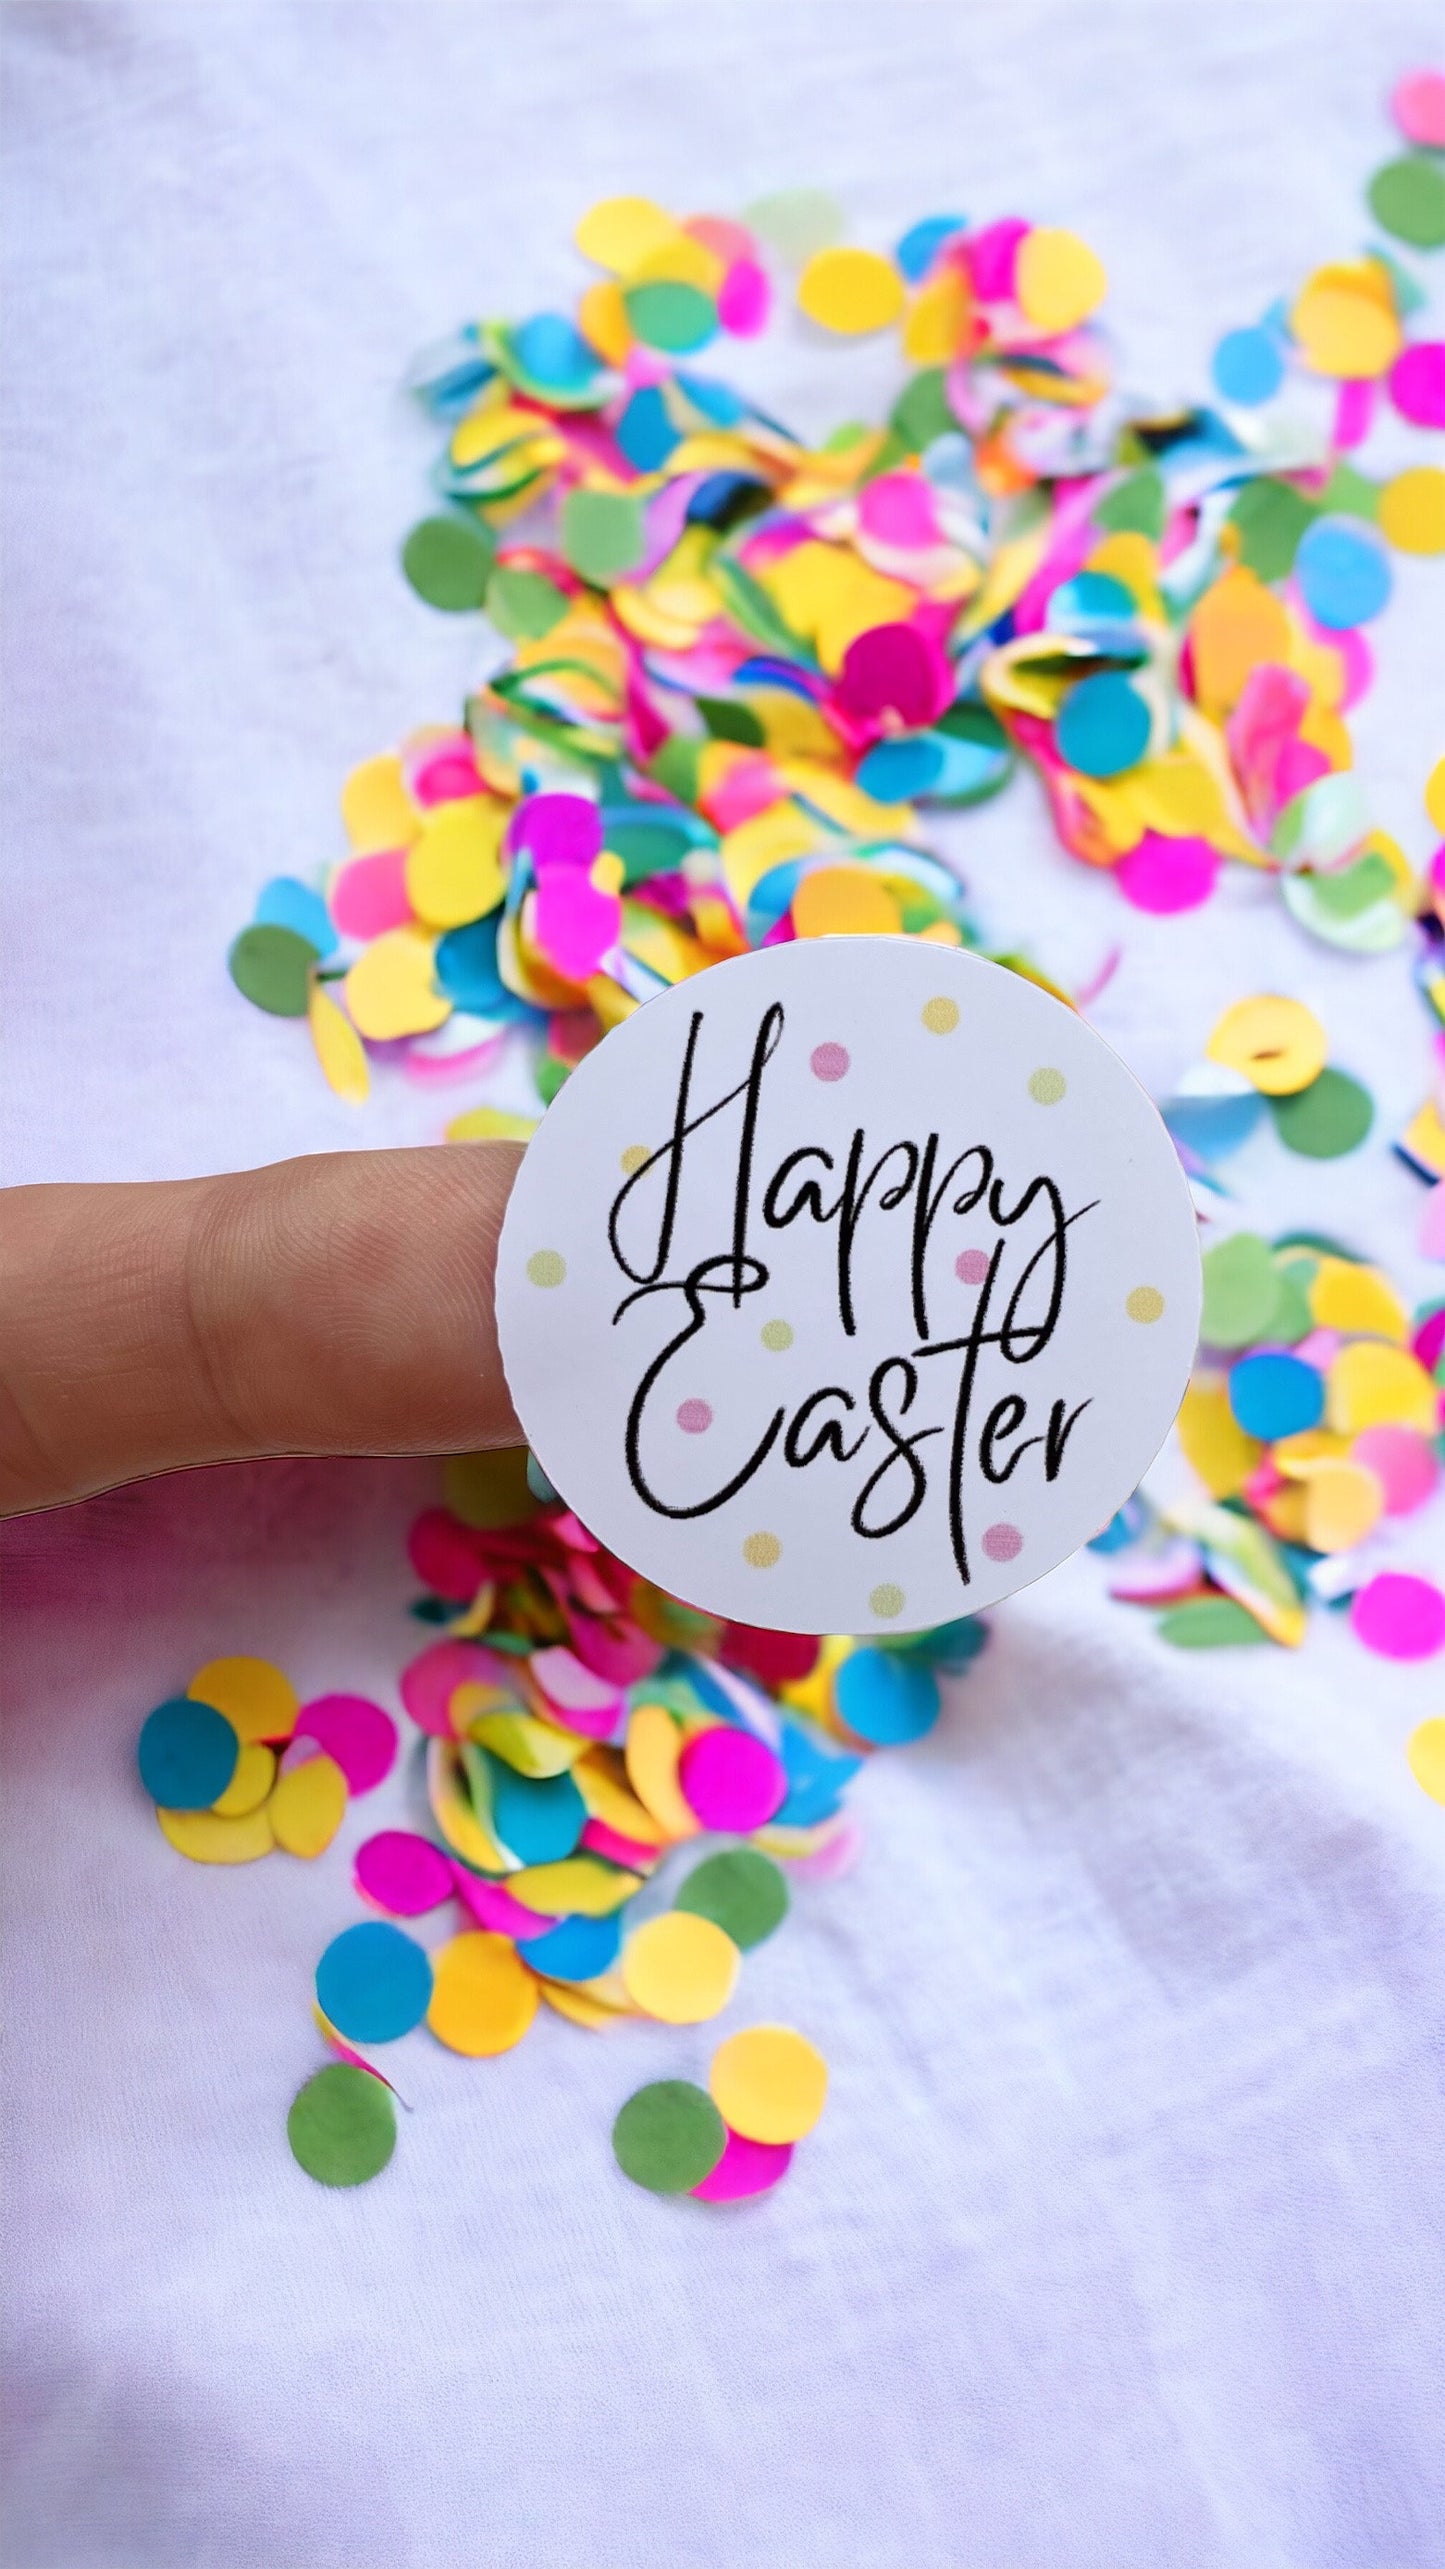 Happy Easter Sticker | 38mm Gift Labels | Easter Egg Stickers | Bunny Rabbit Sticker | Small Business